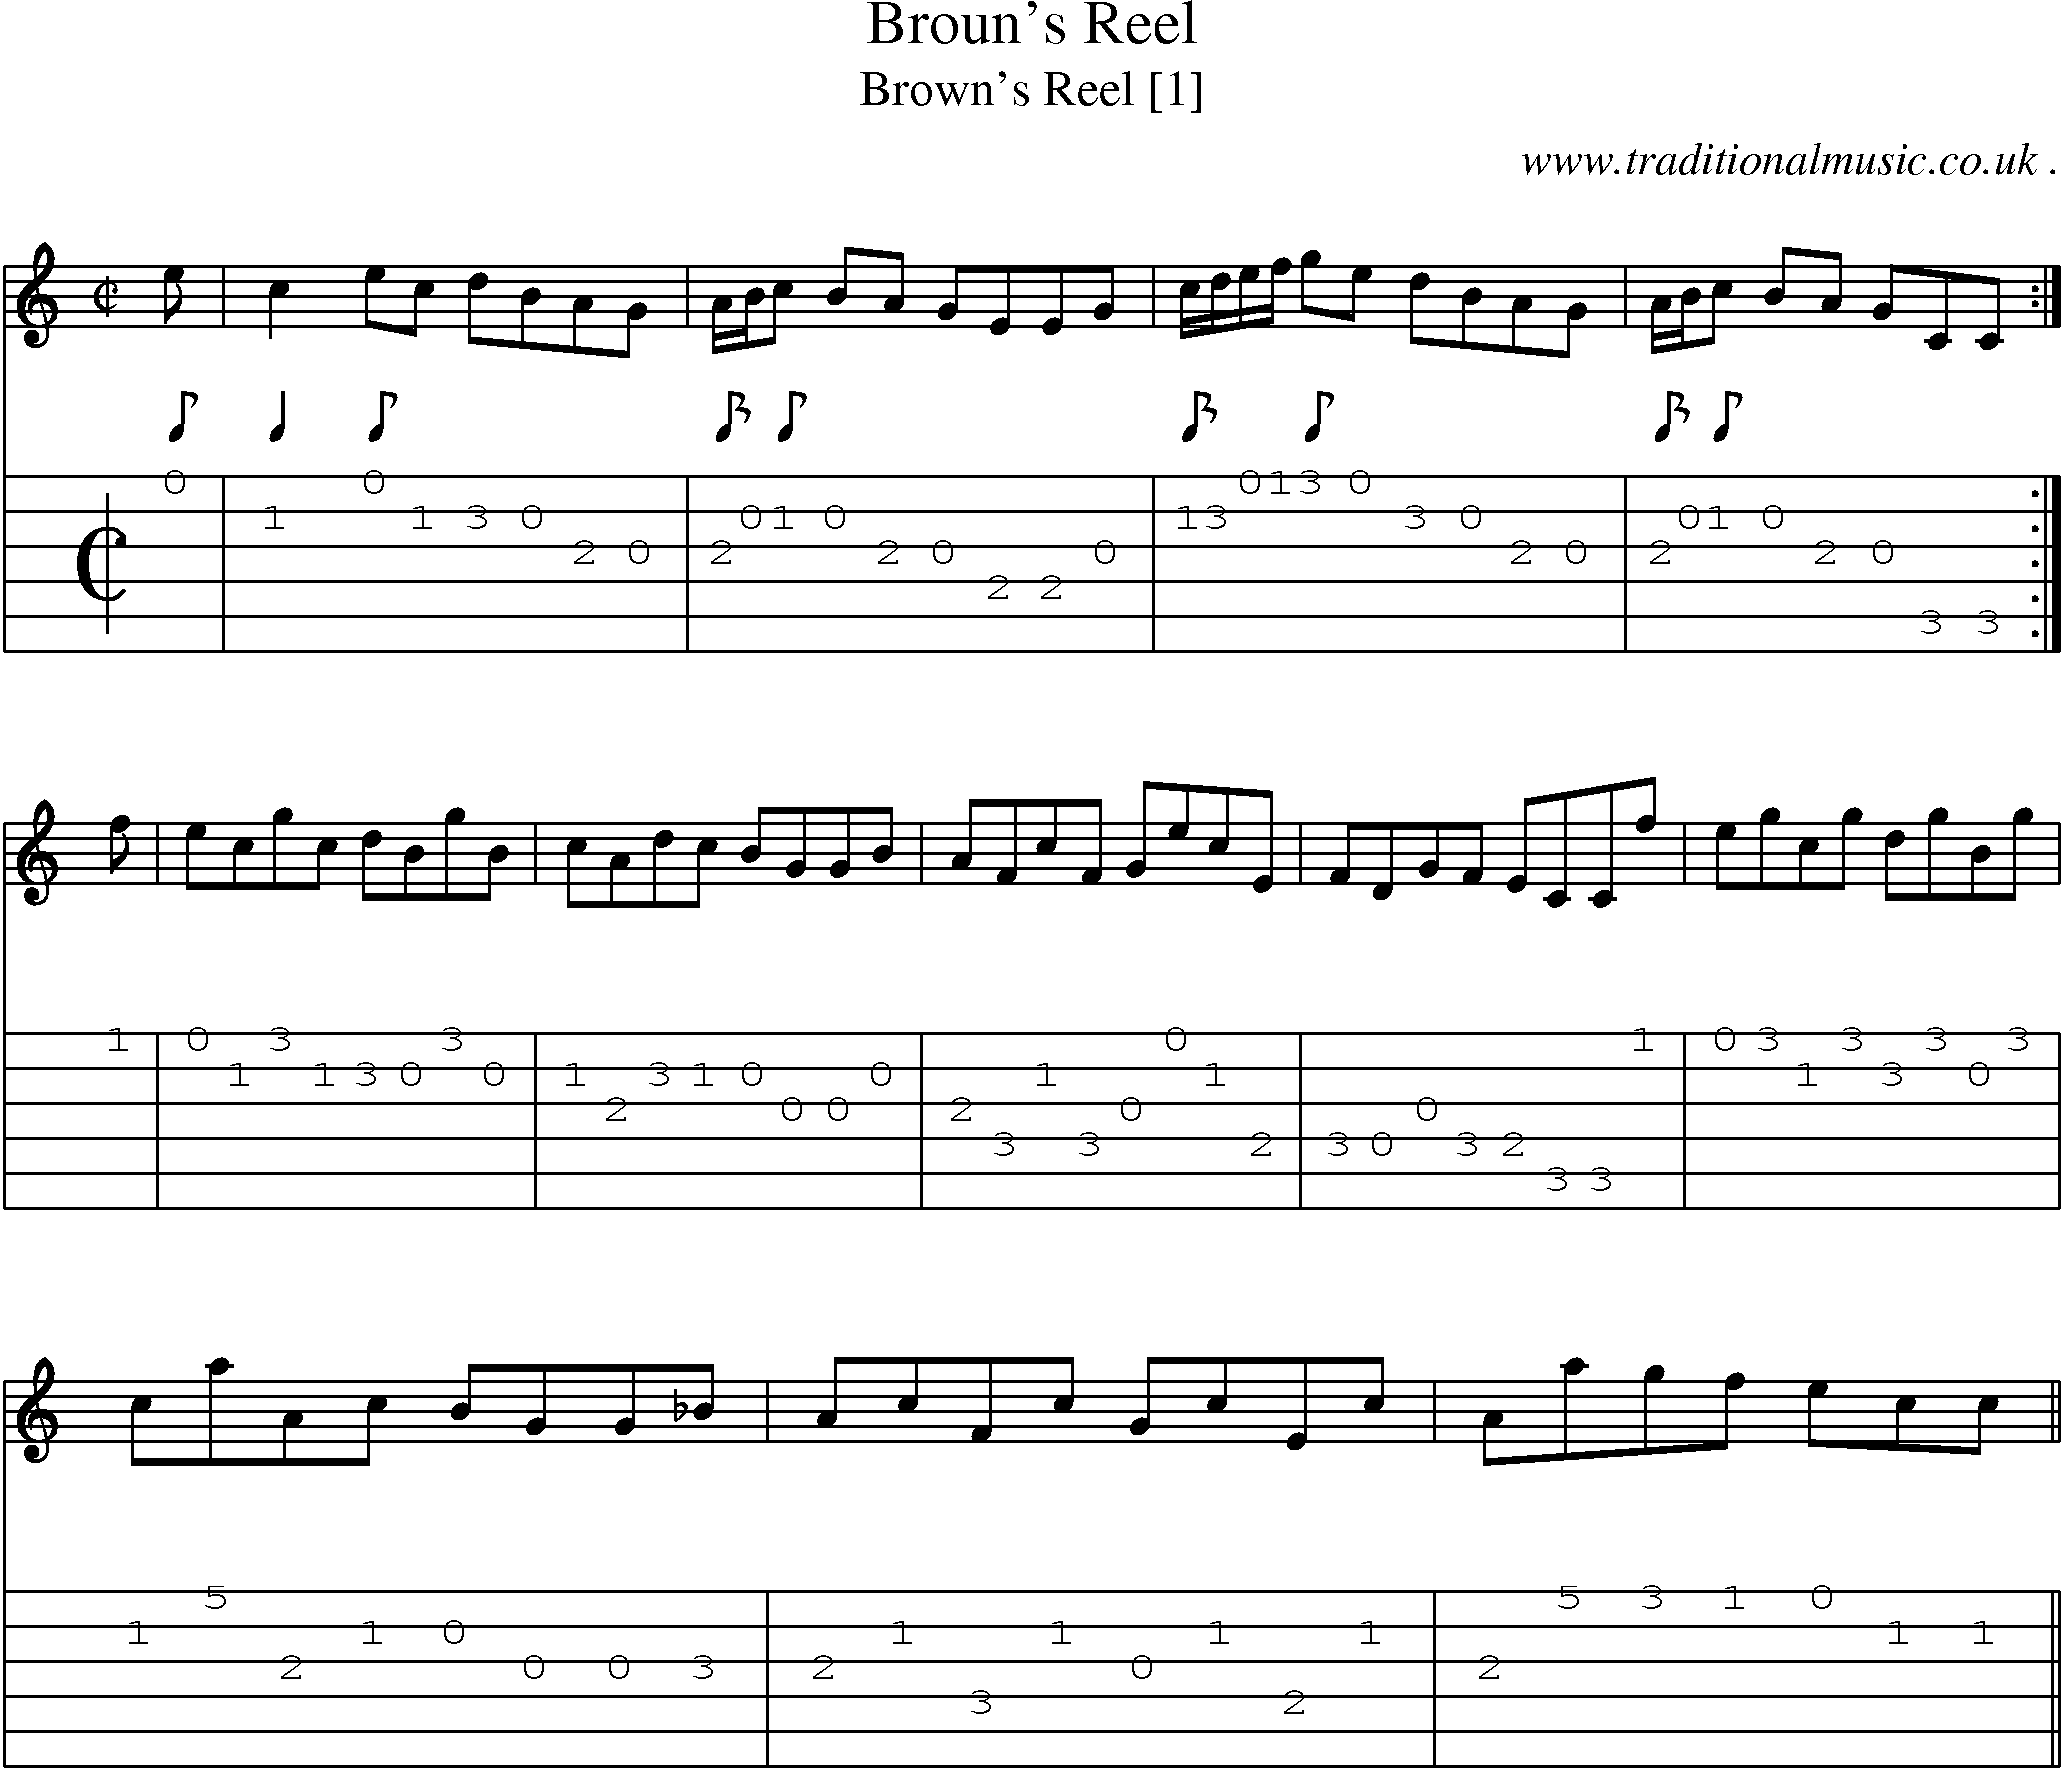 Sheet-music  score, Chords and Guitar Tabs for Brouns Reel